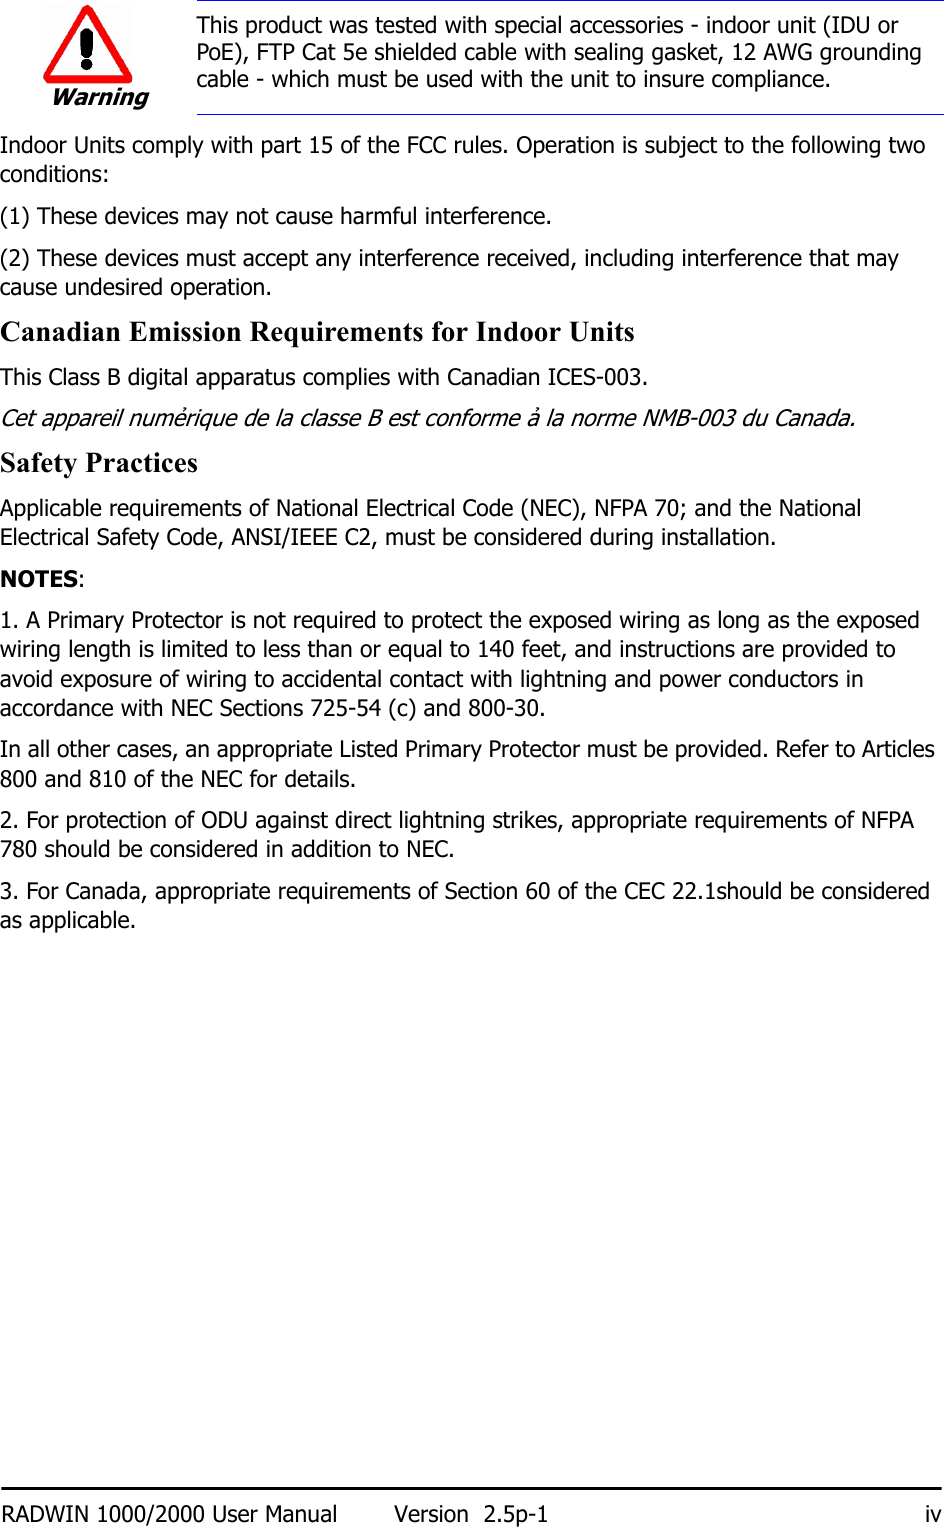 RADWIN 1000/2000 User Manual Version  2.5p-1 ivIndoor Units comply with part 15 of the FCC rules. Operation is subject to the following two conditions:(1) These devices may not cause harmful interference.(2) These devices must accept any interference received, including interference that may cause undesired operation.Canadian Emission Requirements for Indoor UnitsThis Class B digital apparatus complies with Canadian ICES-003.Cet appareil numẻrique de la classe B est conforme ả la norme NMB-003 du Canada.Safety PracticesApplicable requirements of National Electrical Code (NEC), NFPA 70; and the National Electrical Safety Code, ANSI/IEEE C2, must be considered during installation.NOTES:1. A Primary Protector is not required to protect the exposed wiring as long as the exposed wiring length is limited to less than or equal to 140 feet, and instructions are provided to avoid exposure of wiring to accidental contact with lightning and power conductors in accordance with NEC Sections 725-54 (c) and 800-30.In all other cases, an appropriate Listed Primary Protector must be provided. Refer to Articles 800 and 810 of the NEC for details.2. For protection of ODU against direct lightning strikes, appropriate requirements of NFPA 780 should be considered in addition to NEC.3. For Canada, appropriate requirements of Section 60 of the CEC 22.1should be considered as applicable.WarningThis product was tested with special accessories - indoor unit (IDU or PoE), FTP Cat 5e shielded cable with sealing gasket, 12 AWG grounding cable - which must be used with the unit to insure compliance.